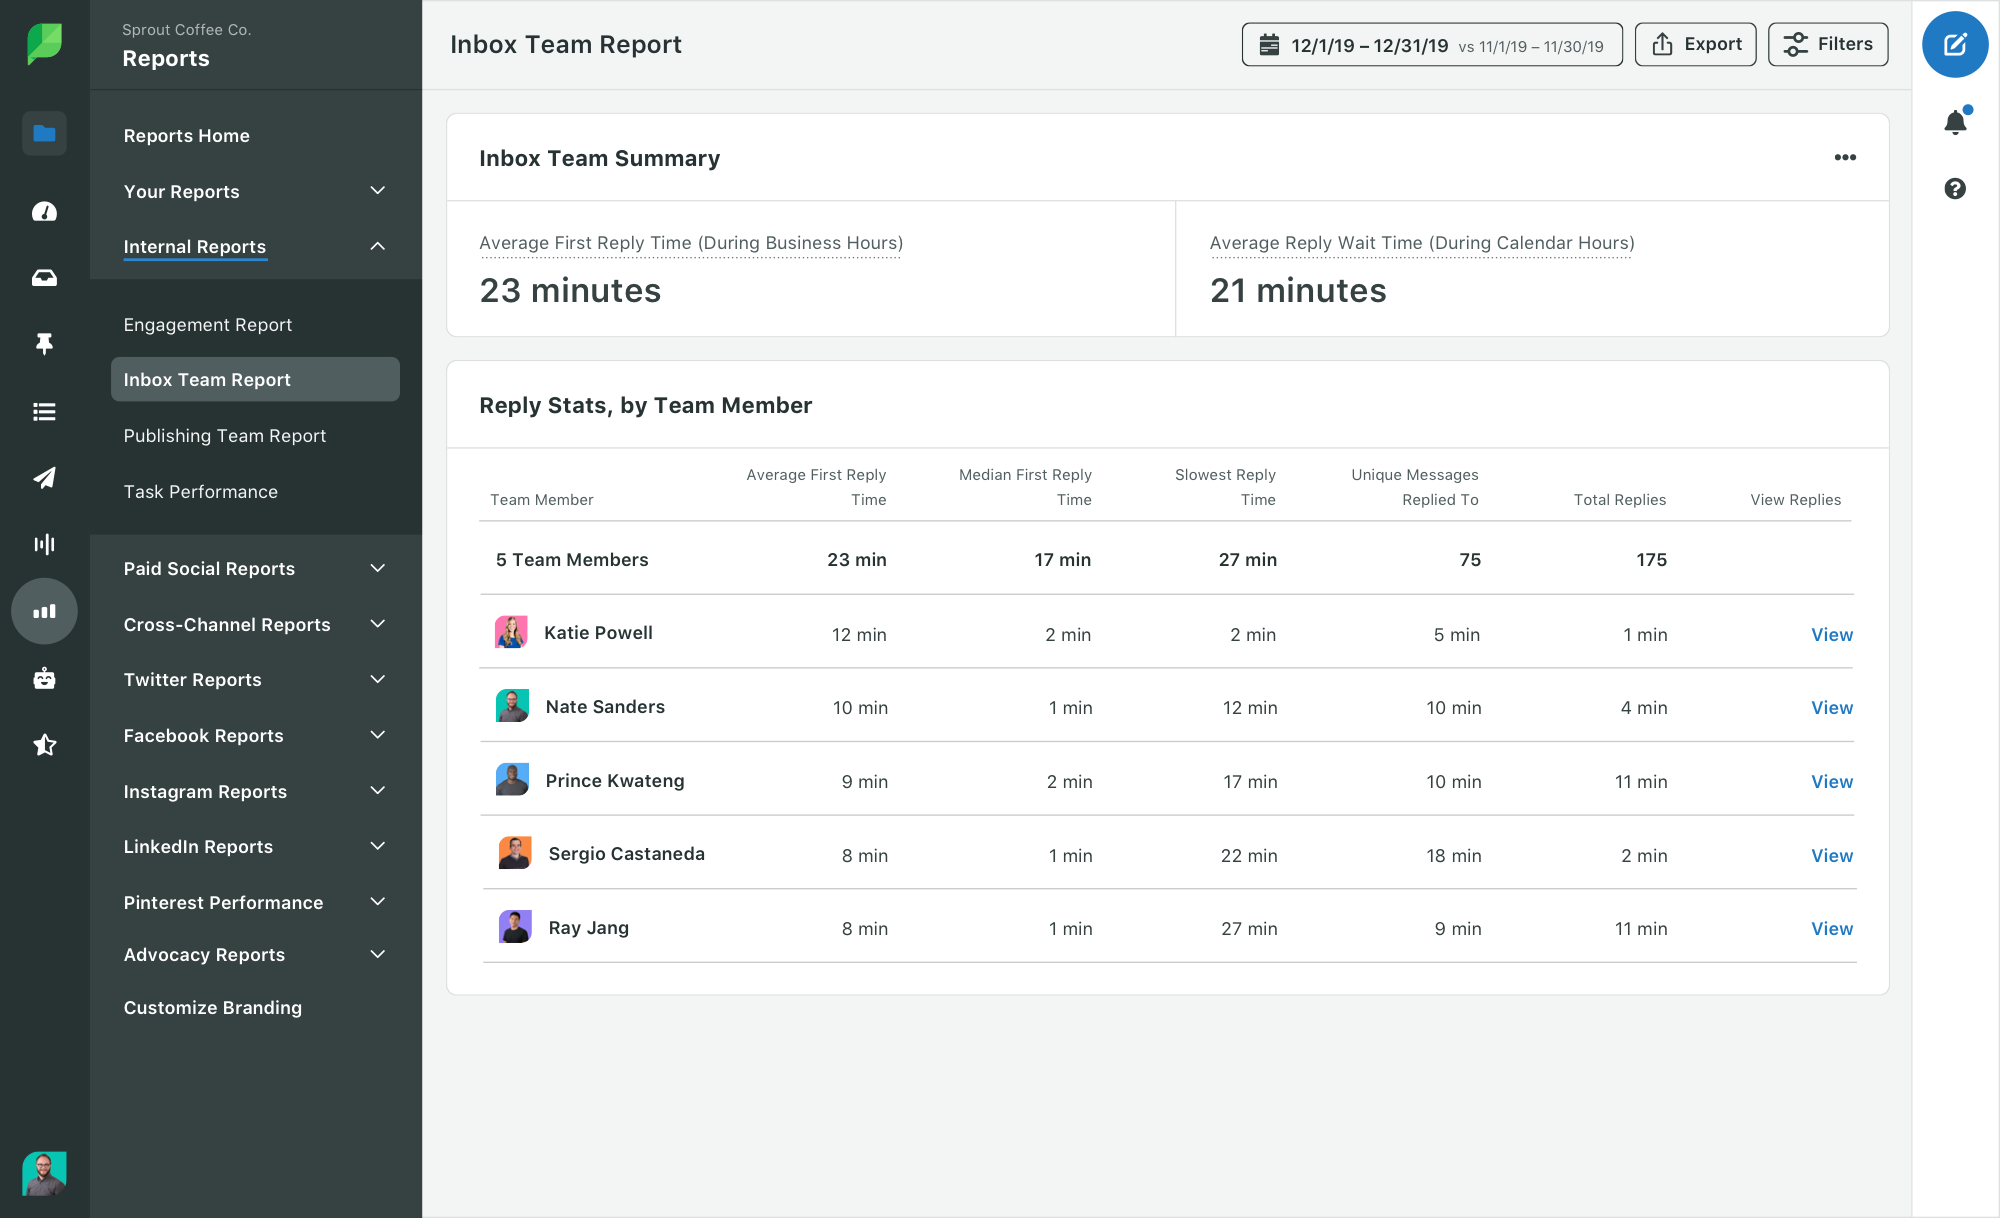 Sprout's Inbox Team Report that displays overall average wait and reply times, as well as social customer service metrics by team member.